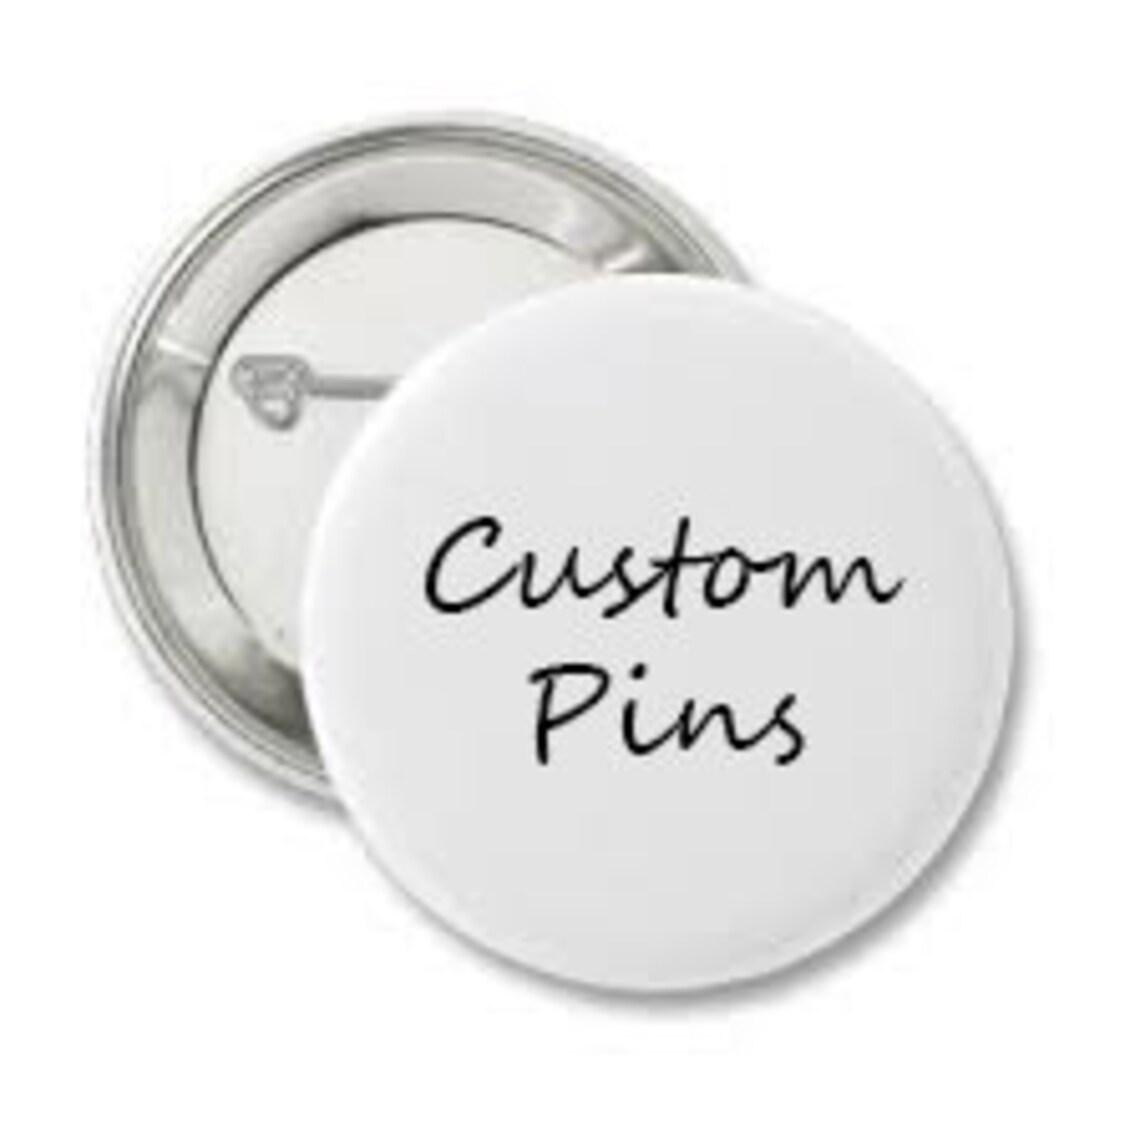 Custom Pins Personalized Pins Etsy